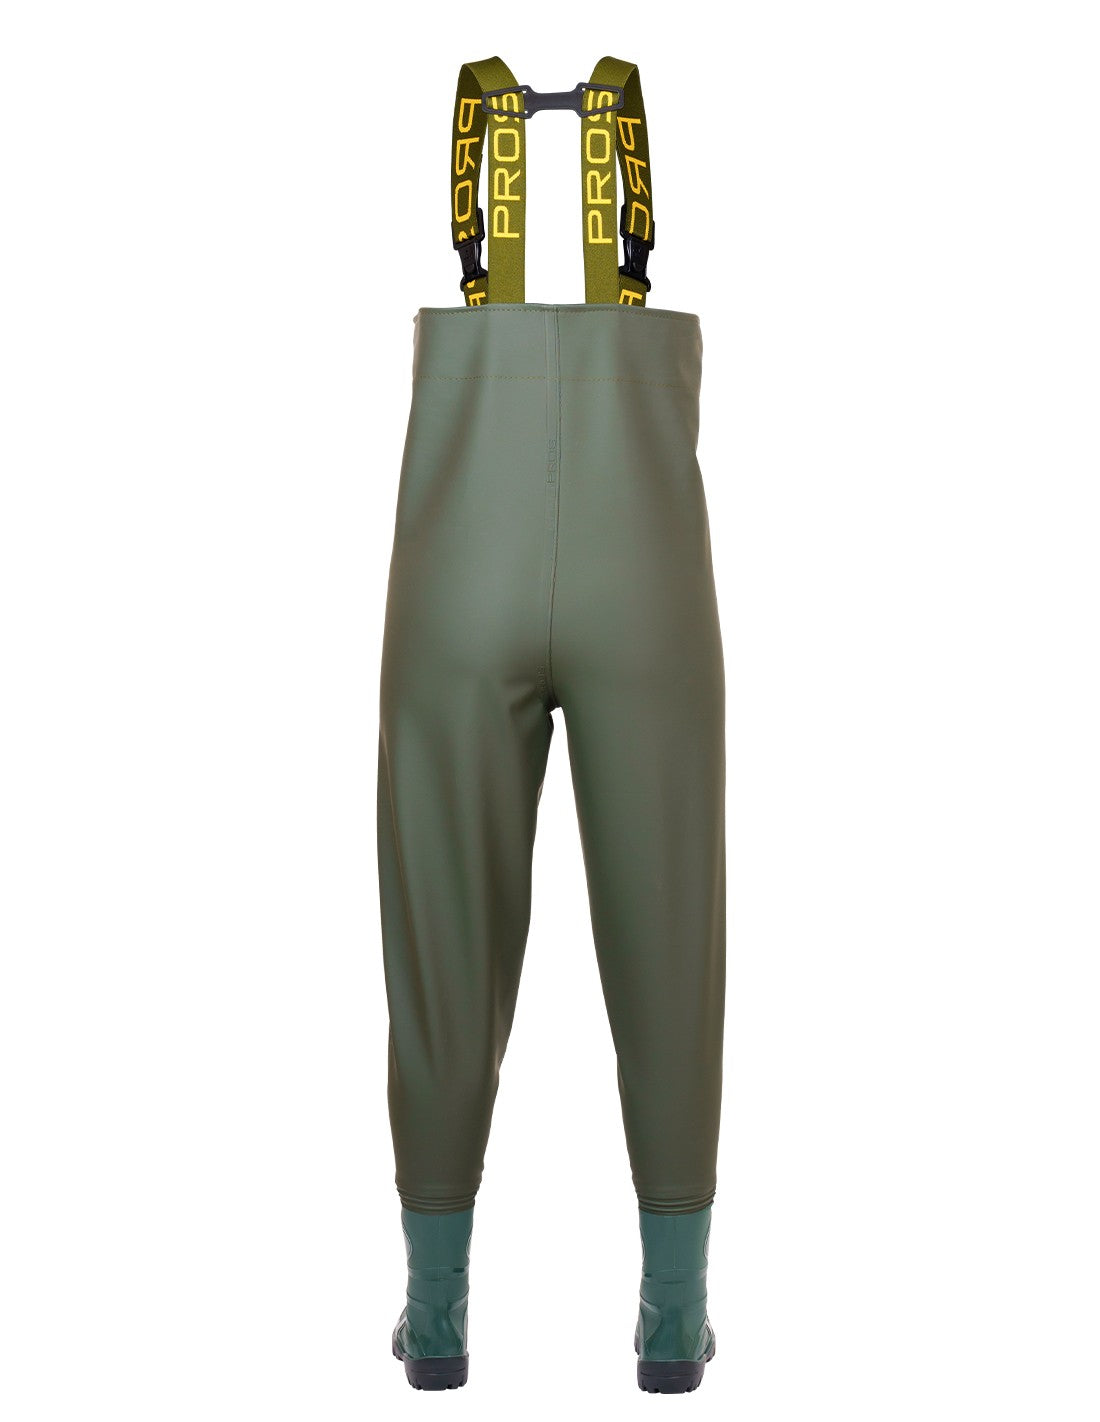 Junior Chest Waders - PROS